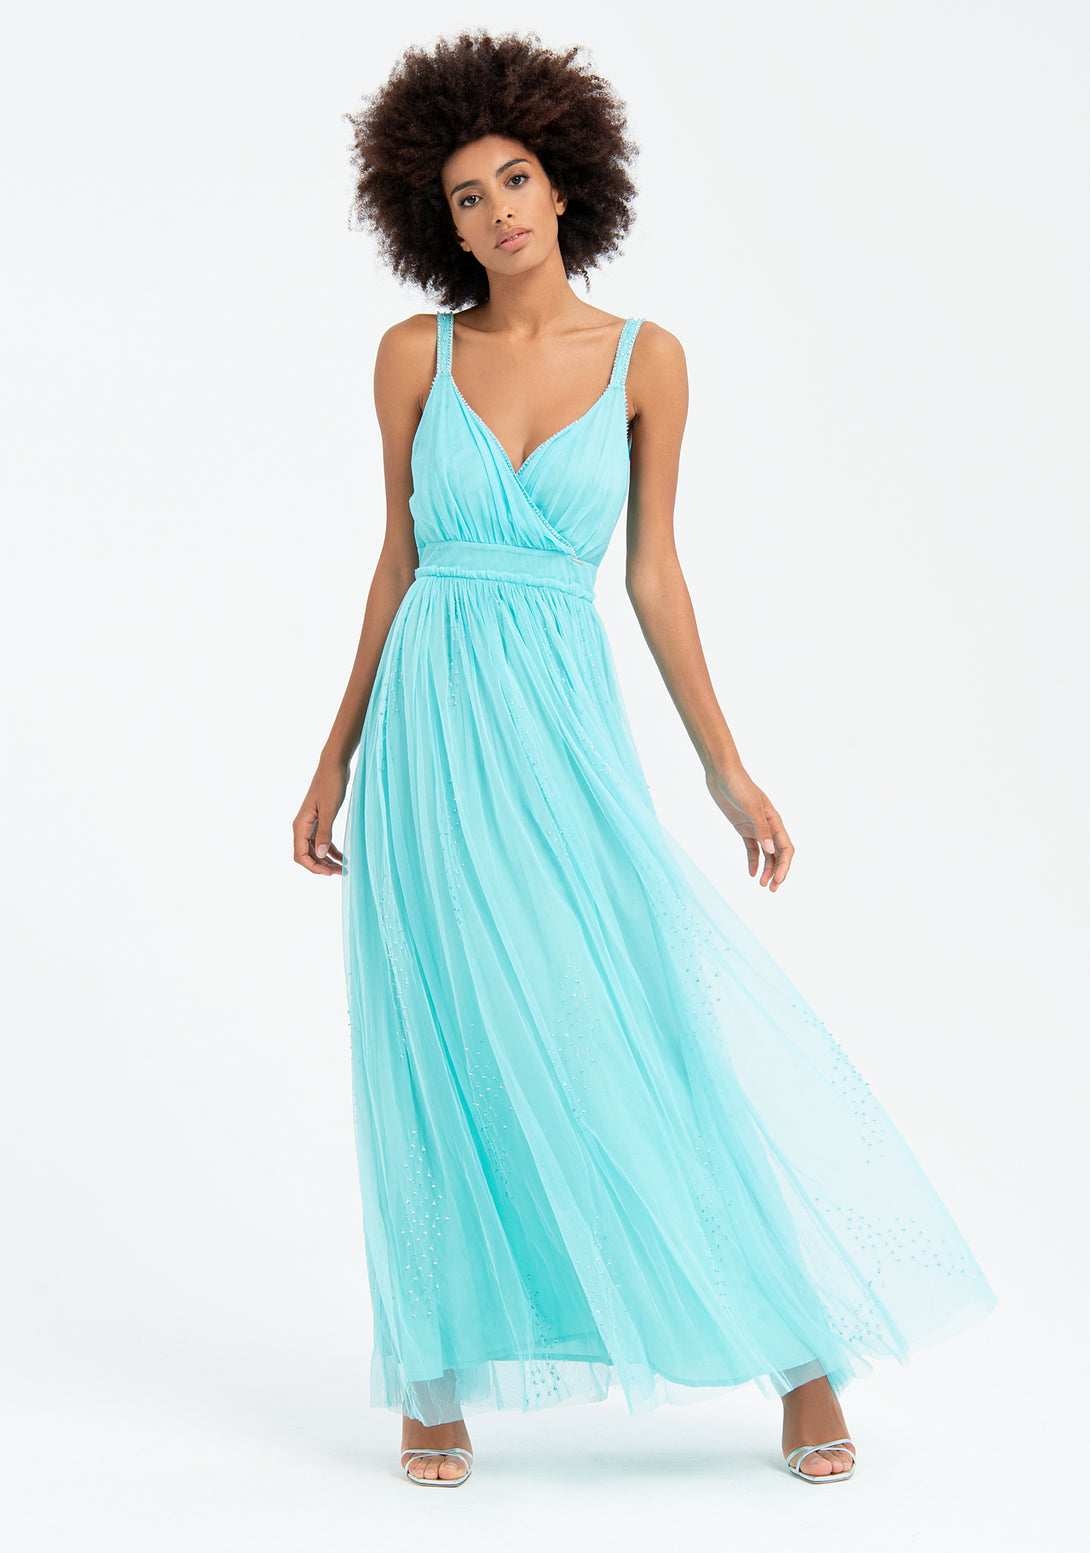 Dress with no sleeves, long, made in tulle fabric with shiny strasses